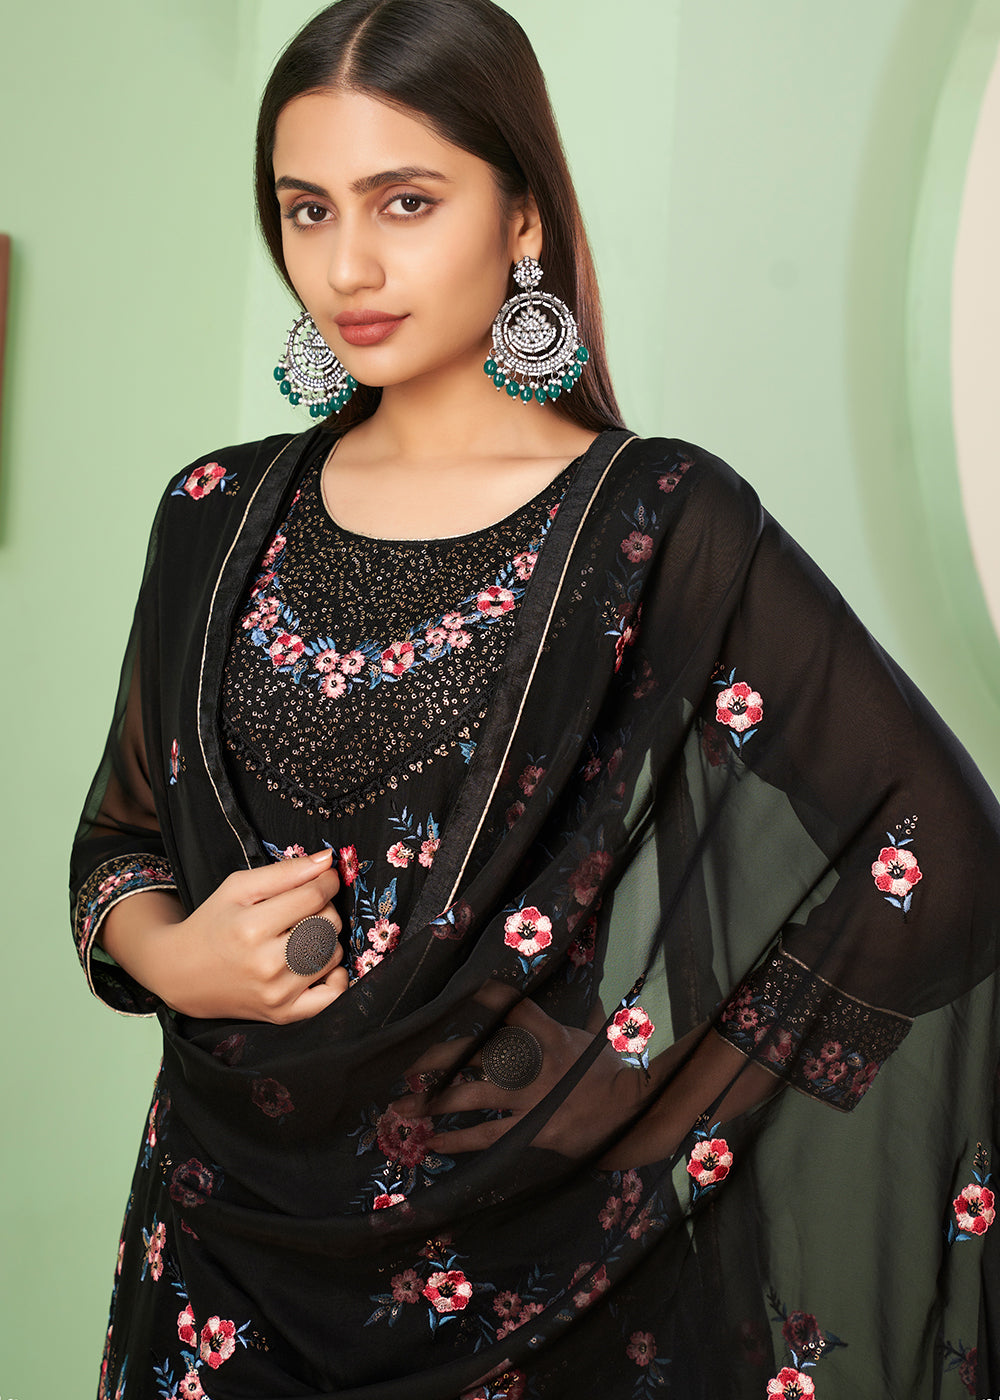 Pitch Black Georgette Salwar Suit with Multi Colour Thread Embroidery & Sequence work